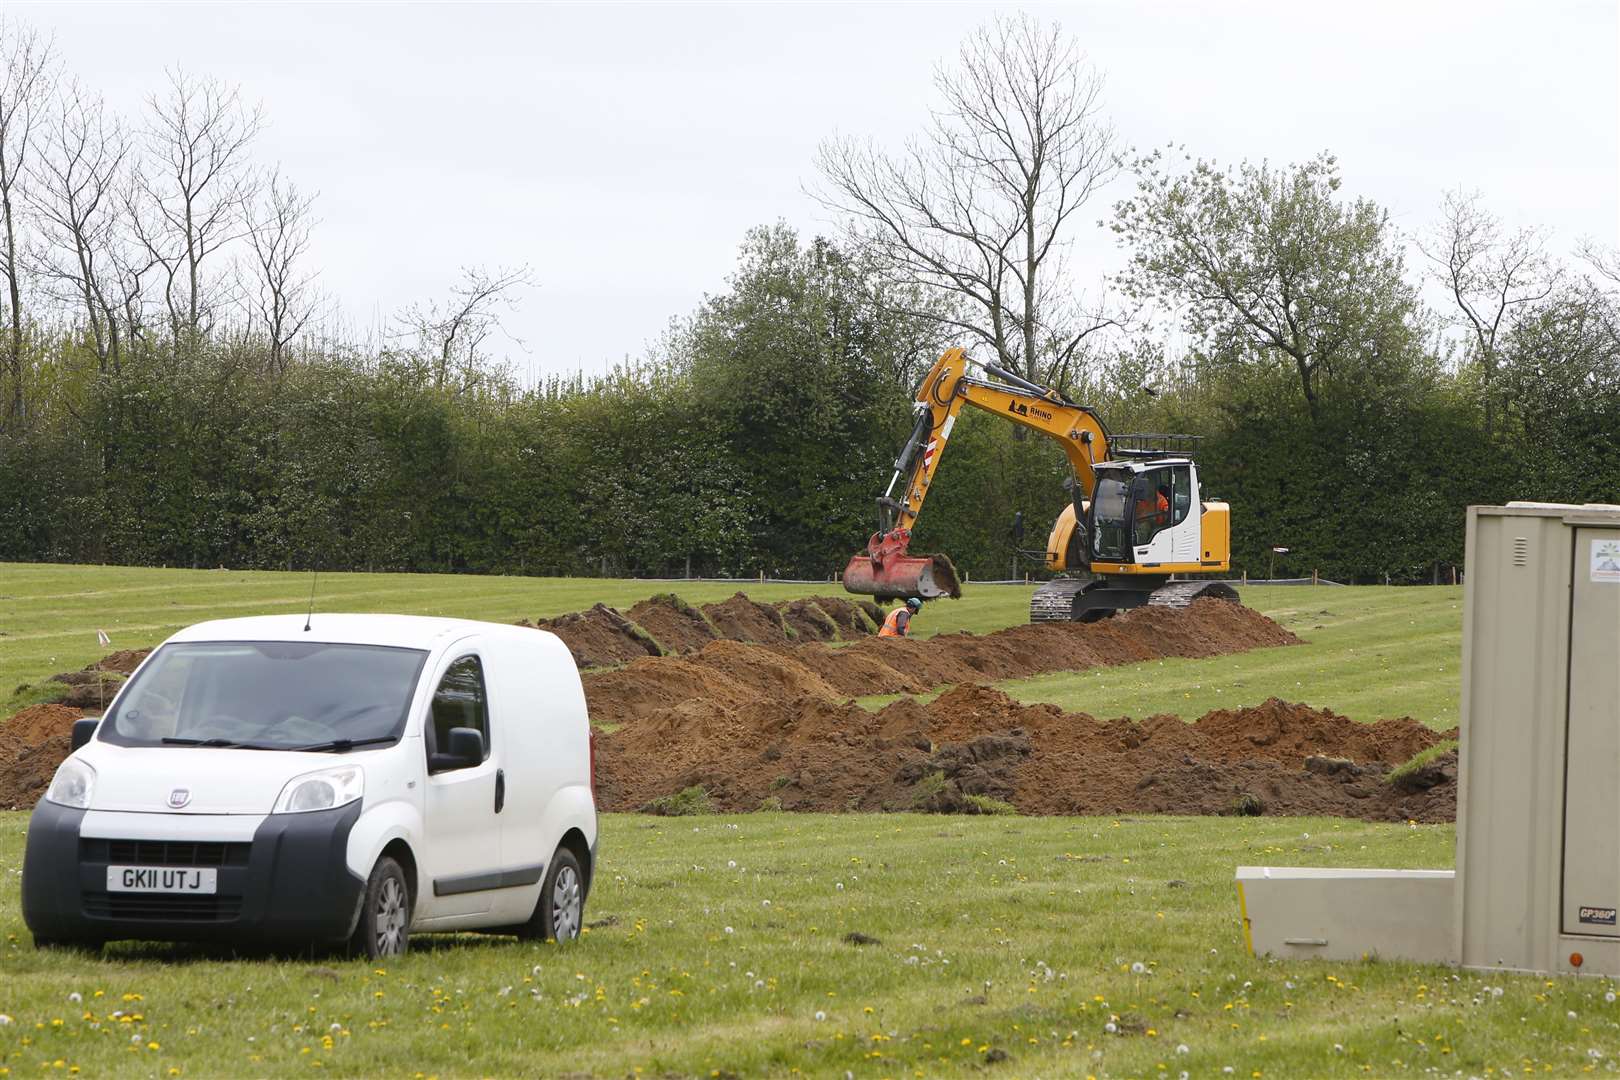 Planning permission for two new schools on Popes Field was only granted last Thursday, but already contractors are on site